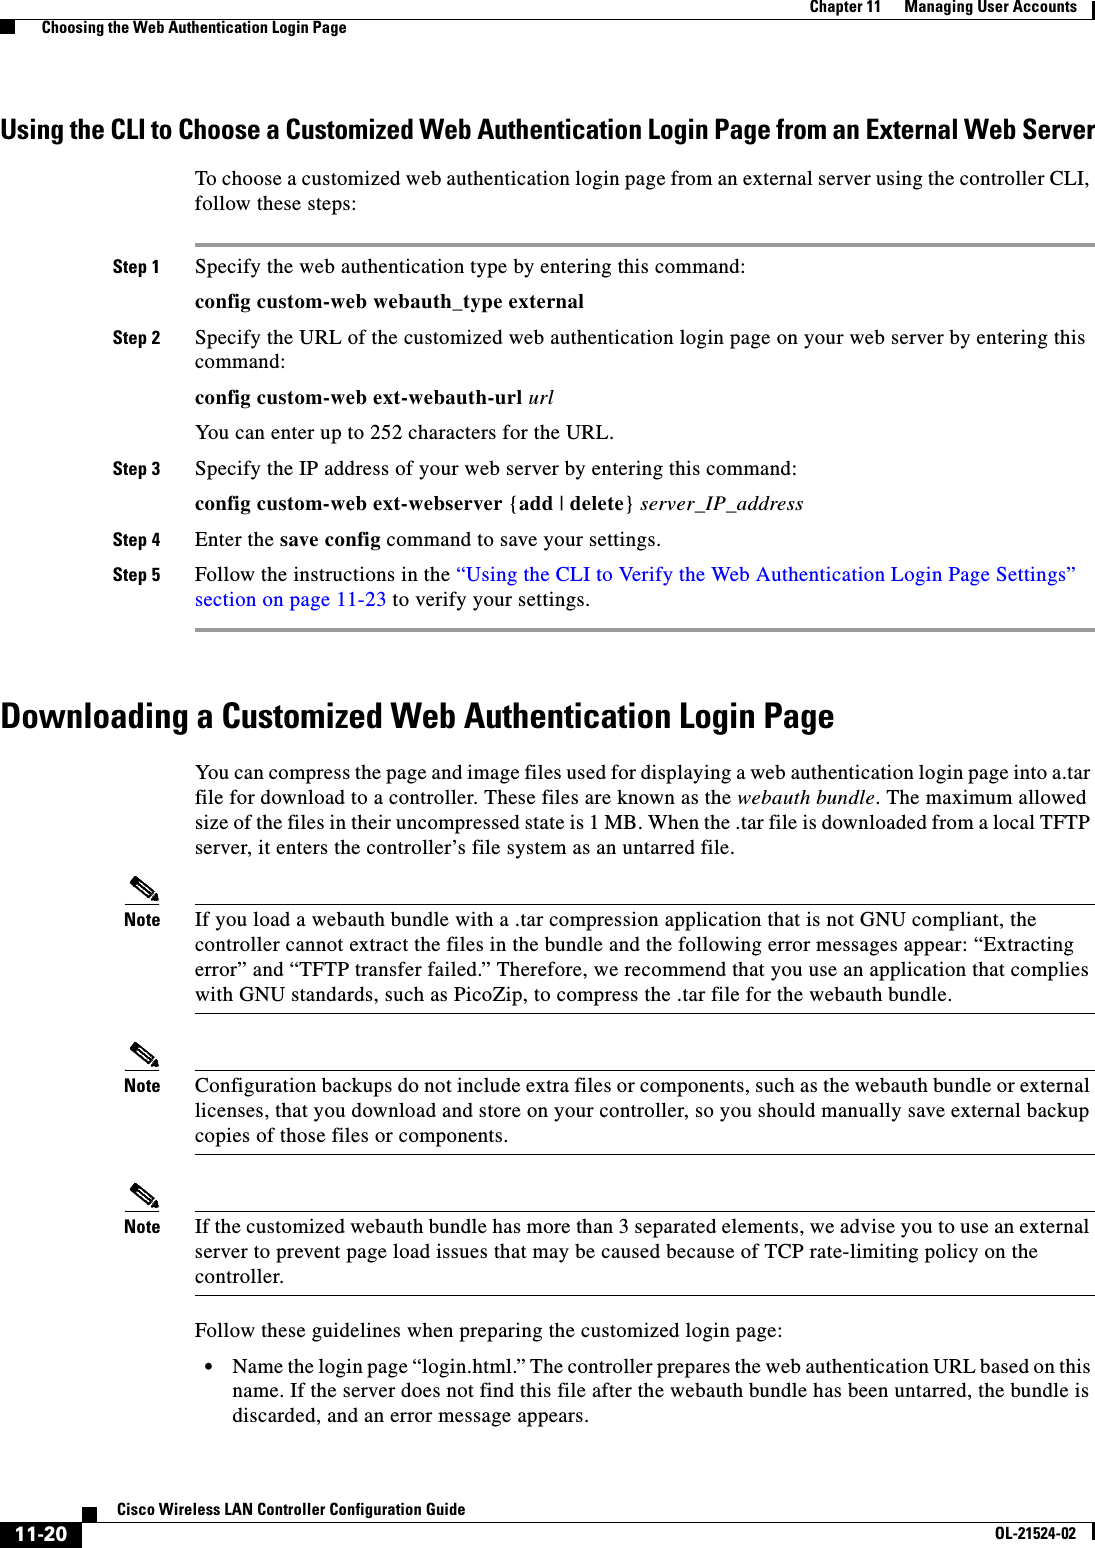  11-20Cisco Wireless LAN Controller Configuration GuideOL-21524-02Chapter 11      Managing User Accounts  Choosing the Web Authentication Login PageUsing the CLI to Choose a Customized Web Authentication Login Page from an External Web ServerTo choose a customized web authentication login page from an external server using the controller CLI, follow these steps:Step 1 Specify the web authentication type by entering this command:config custom-web webauth_type externalStep 2 Specify the URL of the customized web authentication login page on your web server by entering this command:config custom-web ext-webauth-url urlYou can enter up to 252 characters for the URL.Step 3 Specify the IP address of your web server by entering this command:config custom-web ext-webserver {add | delete} server_IP_addressStep 4 Enter the save config command to save your settings.Step 5 Follow the instructions in the “Using the CLI to Verify the Web Authentication Login Page Settings” section on page 11-23 to verify your settings.Downloading a Customized Web Authentication Login PageYou can compress the page and image files used for displaying a web authentication login page into a.tar file for download to a controller. These files are known as the webauth bundle. The maximum allowed size of the files in their uncompressed state is 1 MB. When the .tar file is downloaded from a local TFTP server, it enters the controller’s file system as an untarred file.Note If you load a webauth bundle with a .tar compression application that is not GNU compliant, the controller cannot extract the files in the bundle and the following error messages appear: “Extracting error” and “TFTP transfer failed.” Therefore, we recommend that you use an application that complies with GNU standards, such as PicoZip, to compress the .tar file for the webauth bundle.Note Configuration backups do not include extra files or components, such as the webauth bundle or external licenses, that you download and store on your controller, so you should manually save external backup copies of those files or components.Note If the customized webauth bundle has more than 3 separated elements, we advise you to use an external server to prevent page load issues that may be caused because of TCP rate-limiting policy on the controller.Follow these guidelines when preparing the customized login page:  • Name the login page “login.html.” The controller prepares the web authentication URL based on this name. If the server does not find this file after the webauth bundle has been untarred, the bundle is discarded, and an error message appears.